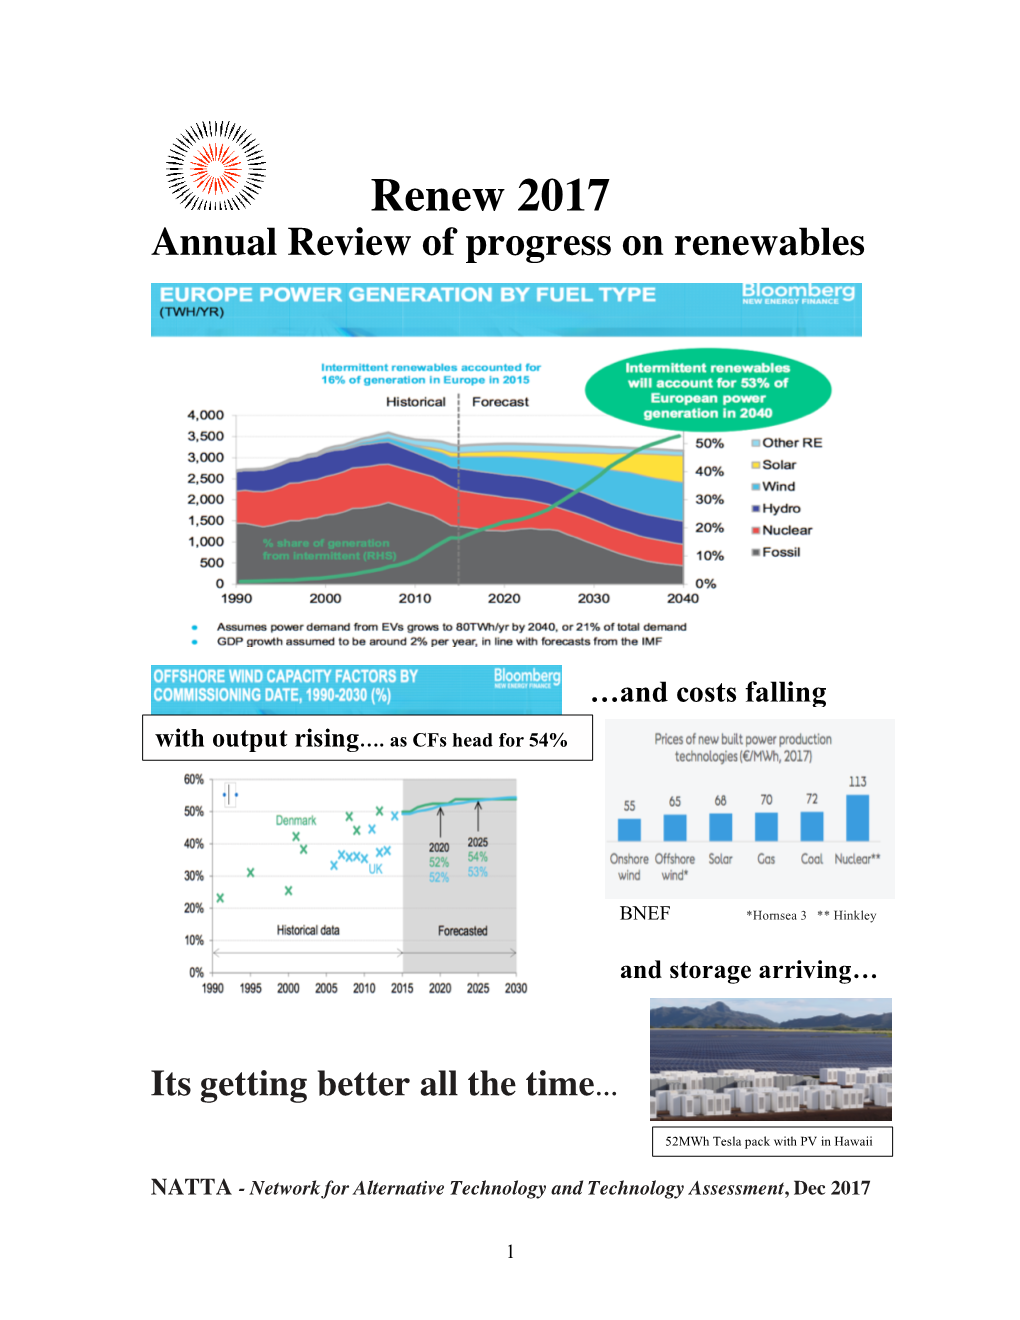 Renew 2017 Annual Review of Progress on Renewables